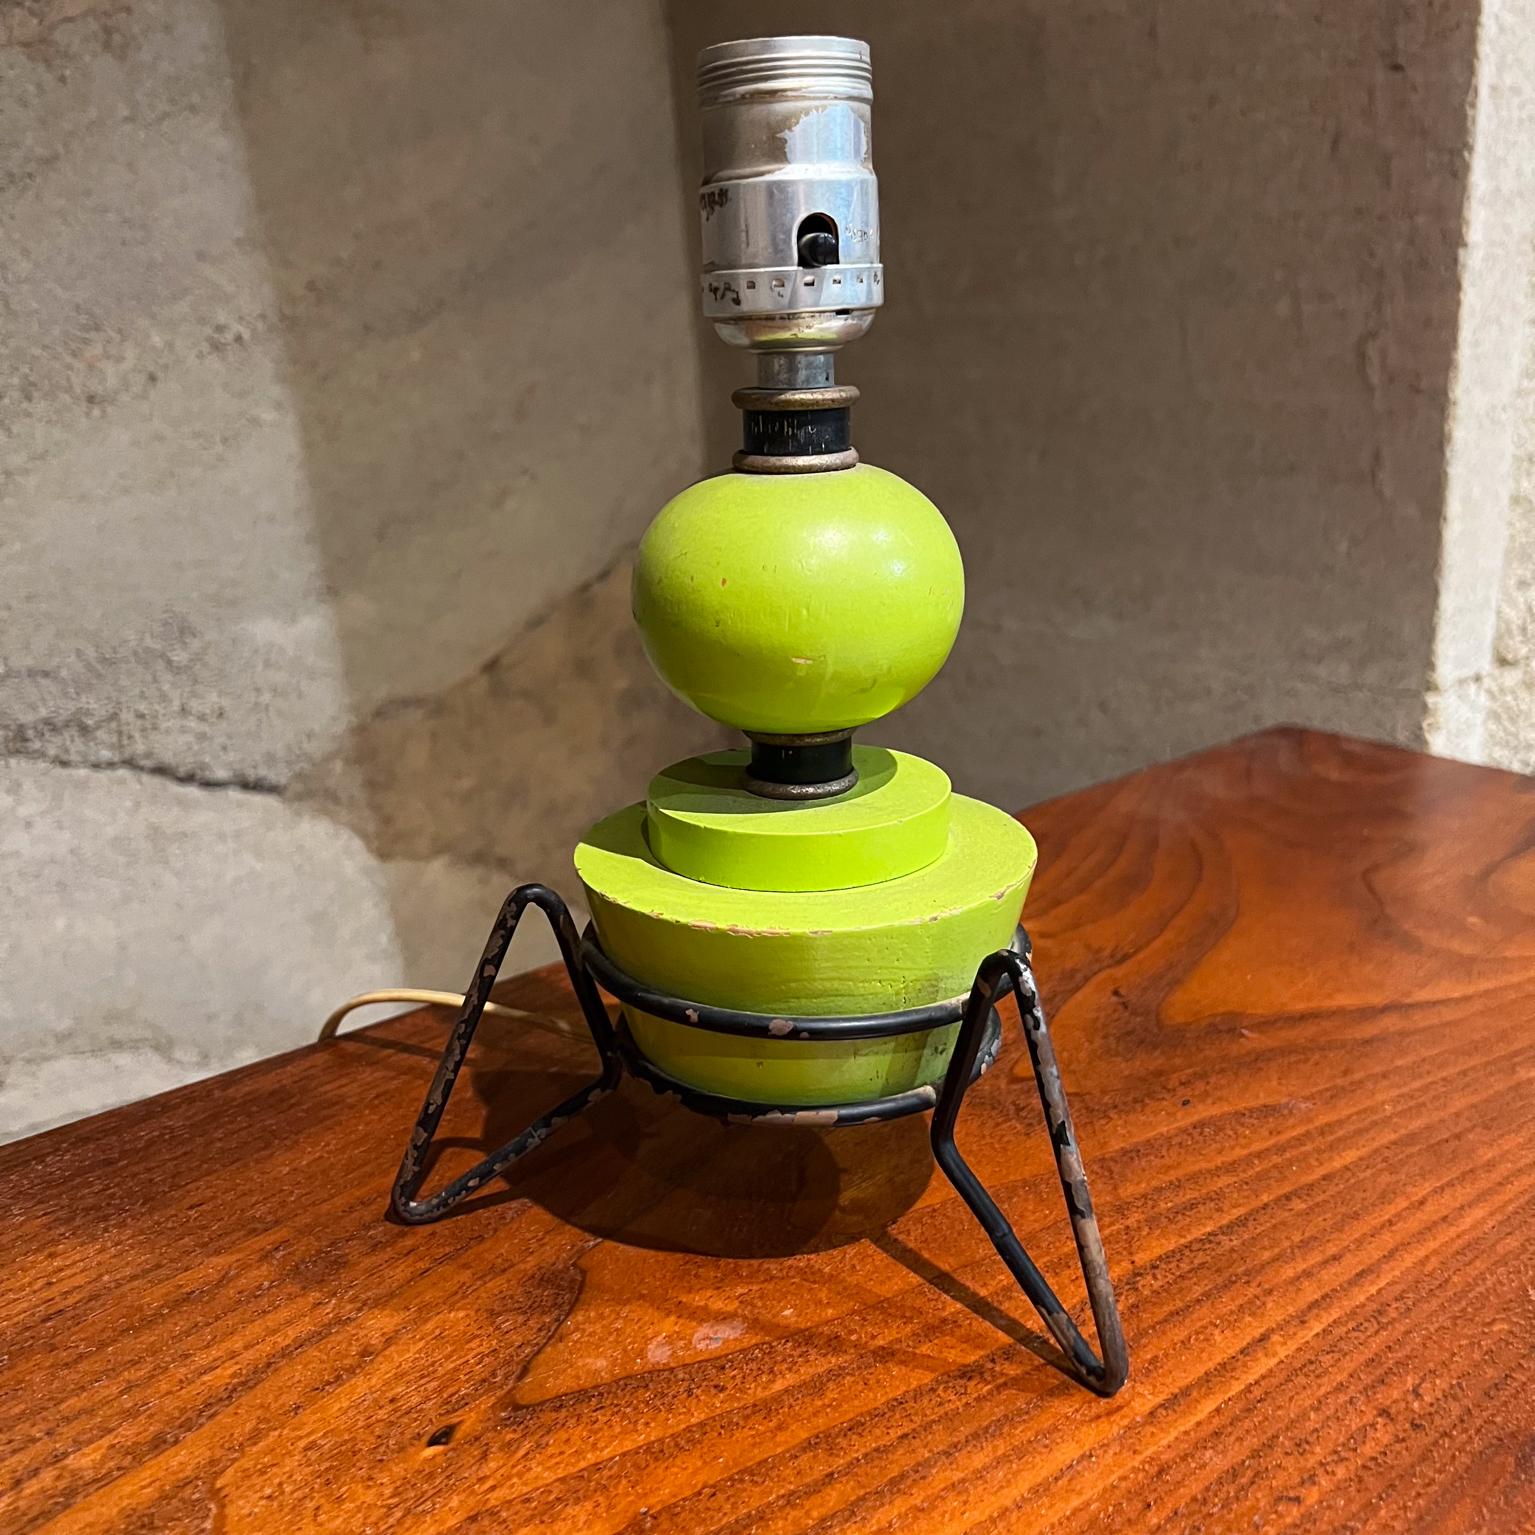 
1960s Atomic Lime Green Wood Table Lamp Tripod Iron Base
California atomic design.
No label. After Arthur Umanoff.
6.5 diameter x 10 h
Original vintage condition unrestored. Original wiring. No shade included.
Tested and currently working. Wear and